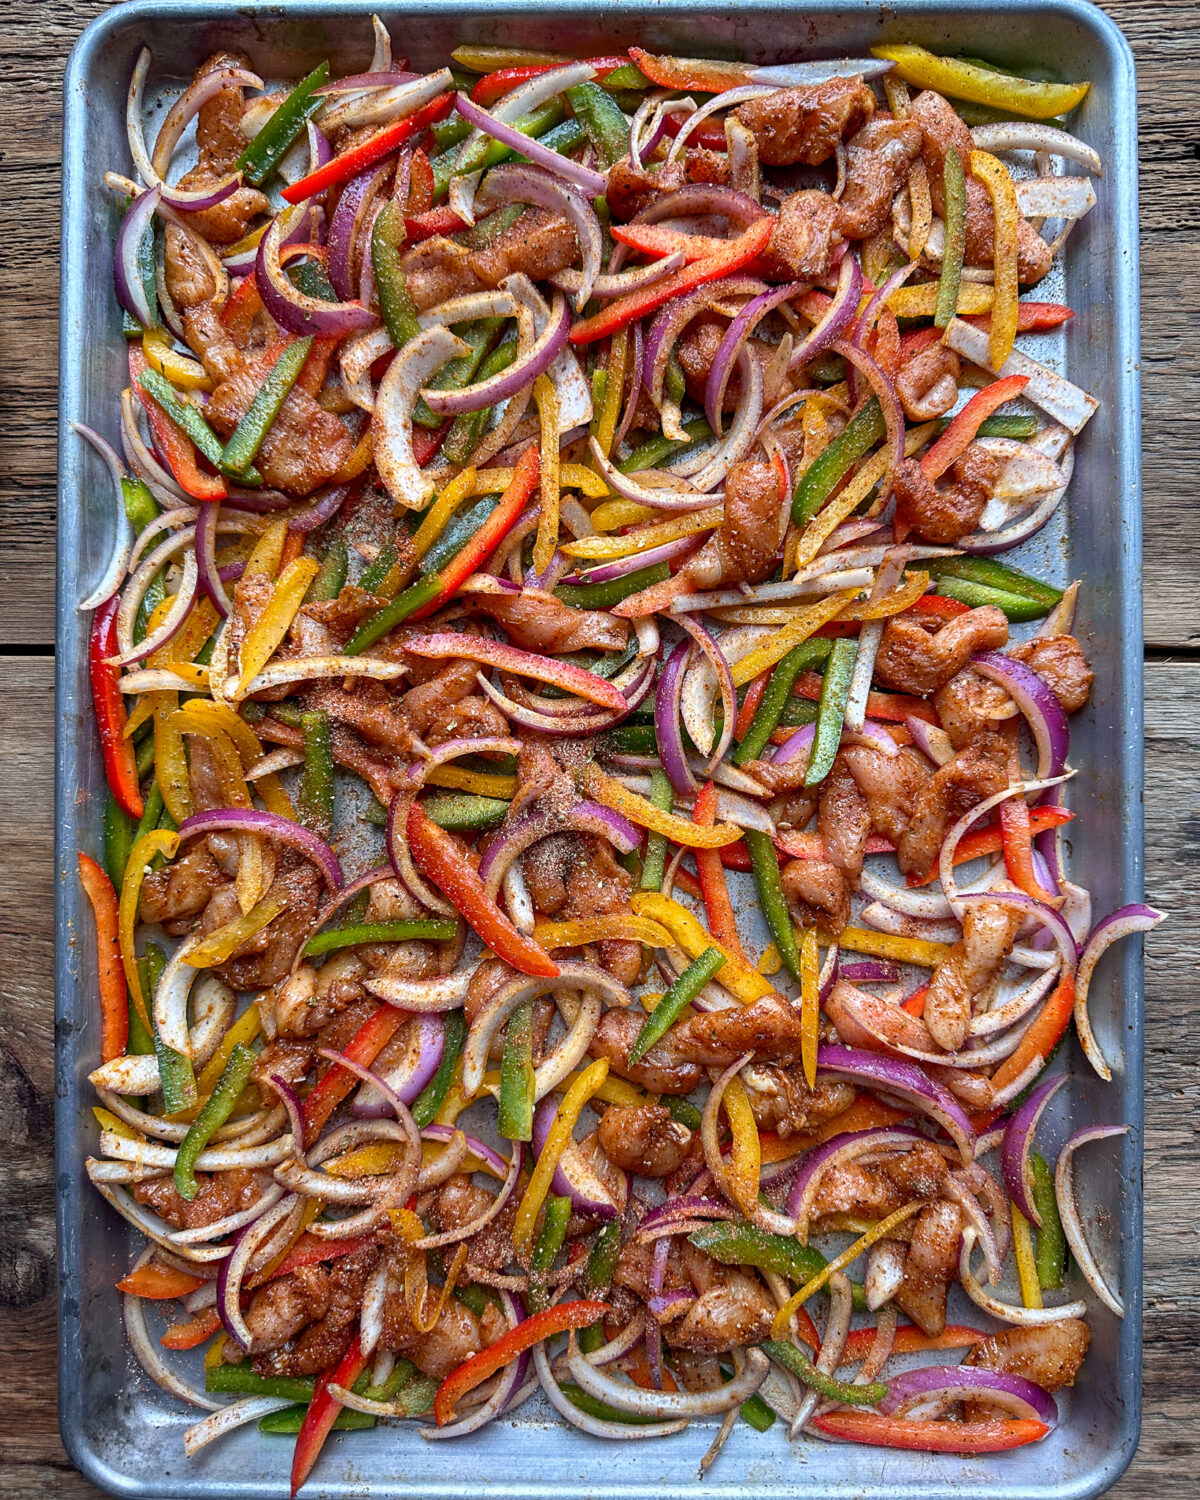 Spread the chicken and vegetables in an even layer across the sheet pan. 